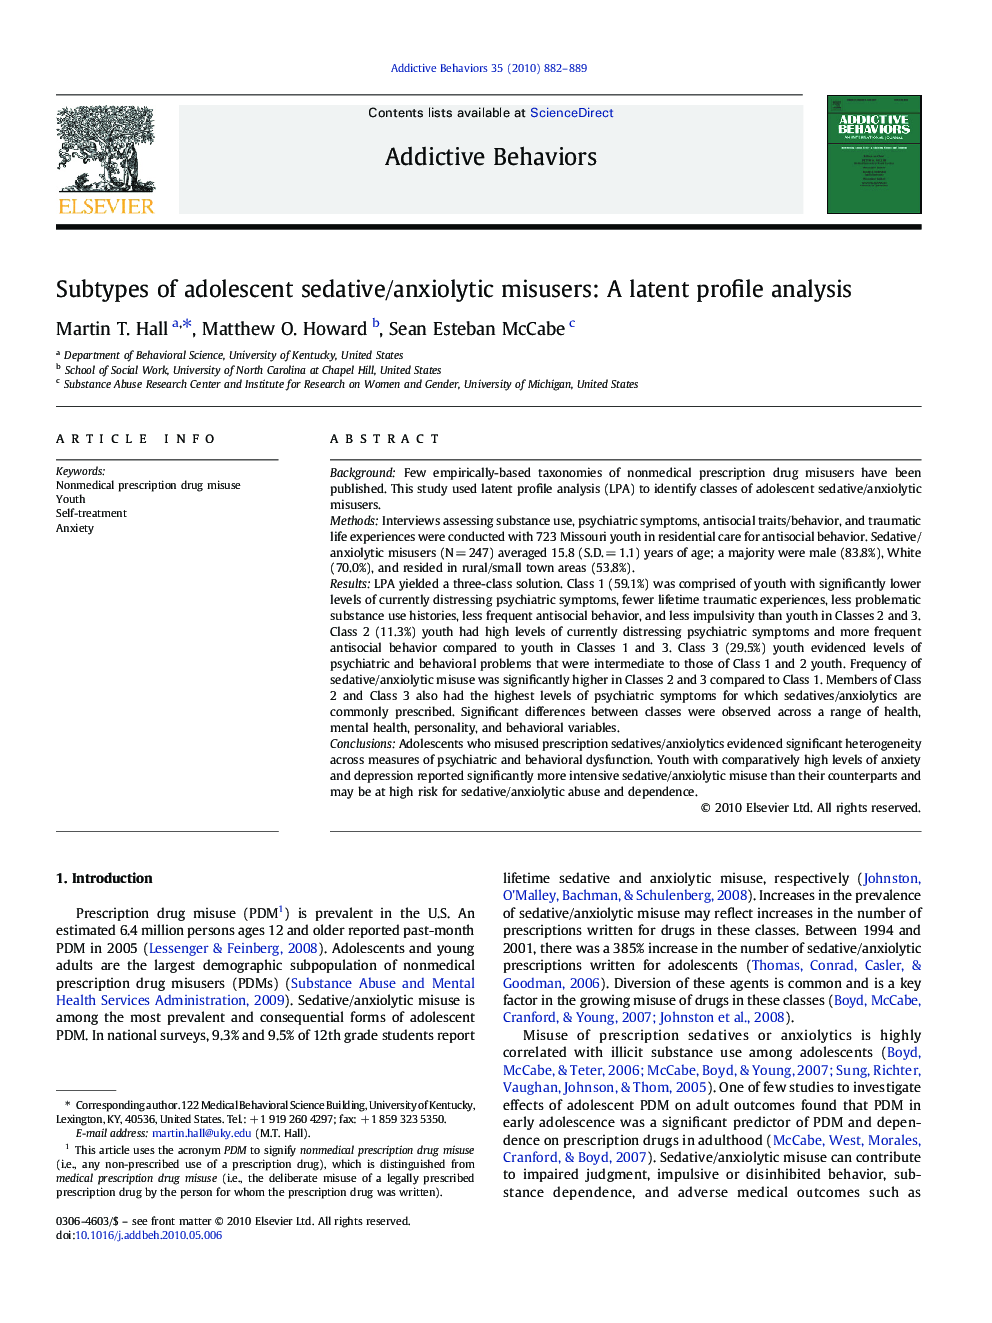 Subtypes of adolescent sedative/anxiolytic misusers: A latent profile analysis